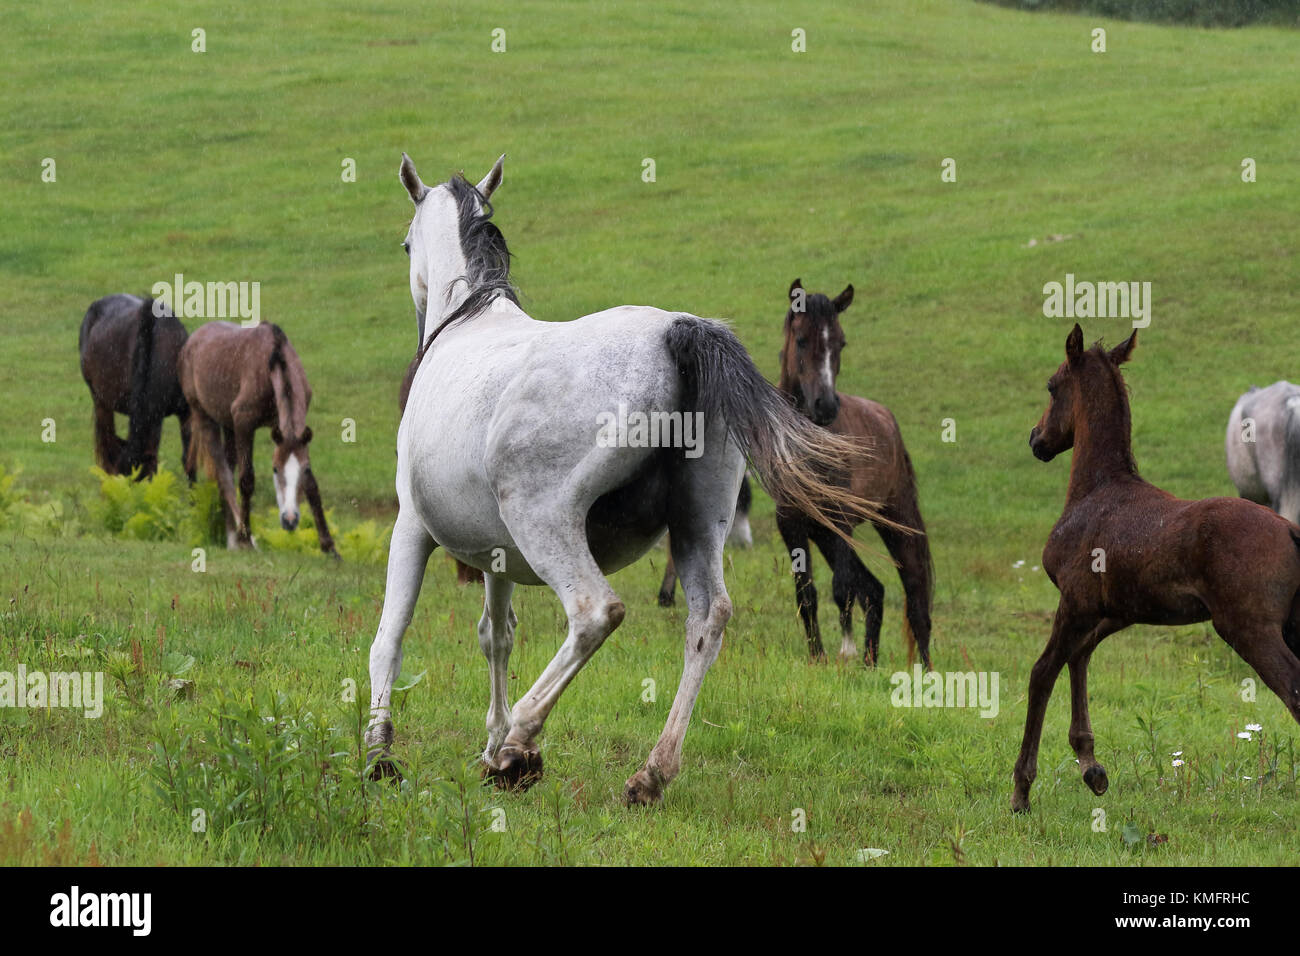 Horse in Ranch Stock Photo